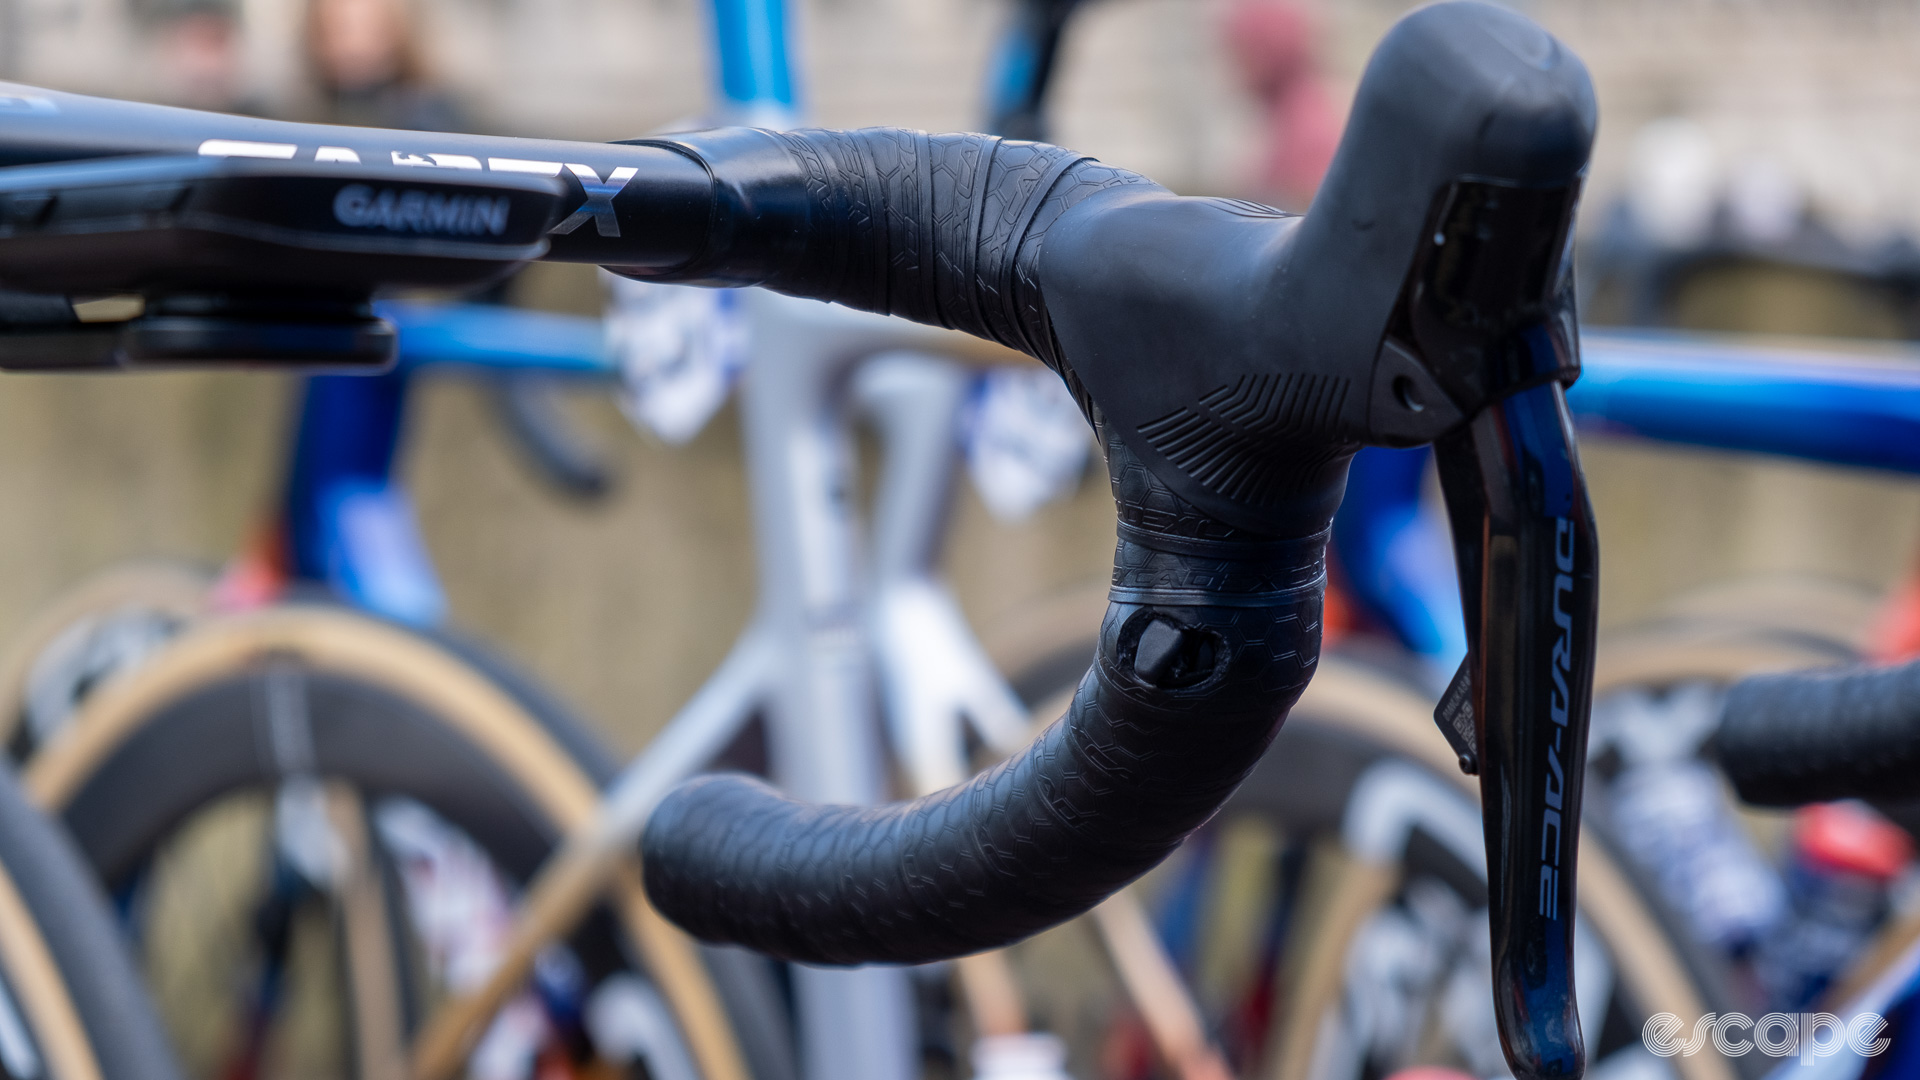 The image shows the satellite shifter on the inside of the handlebar drop.